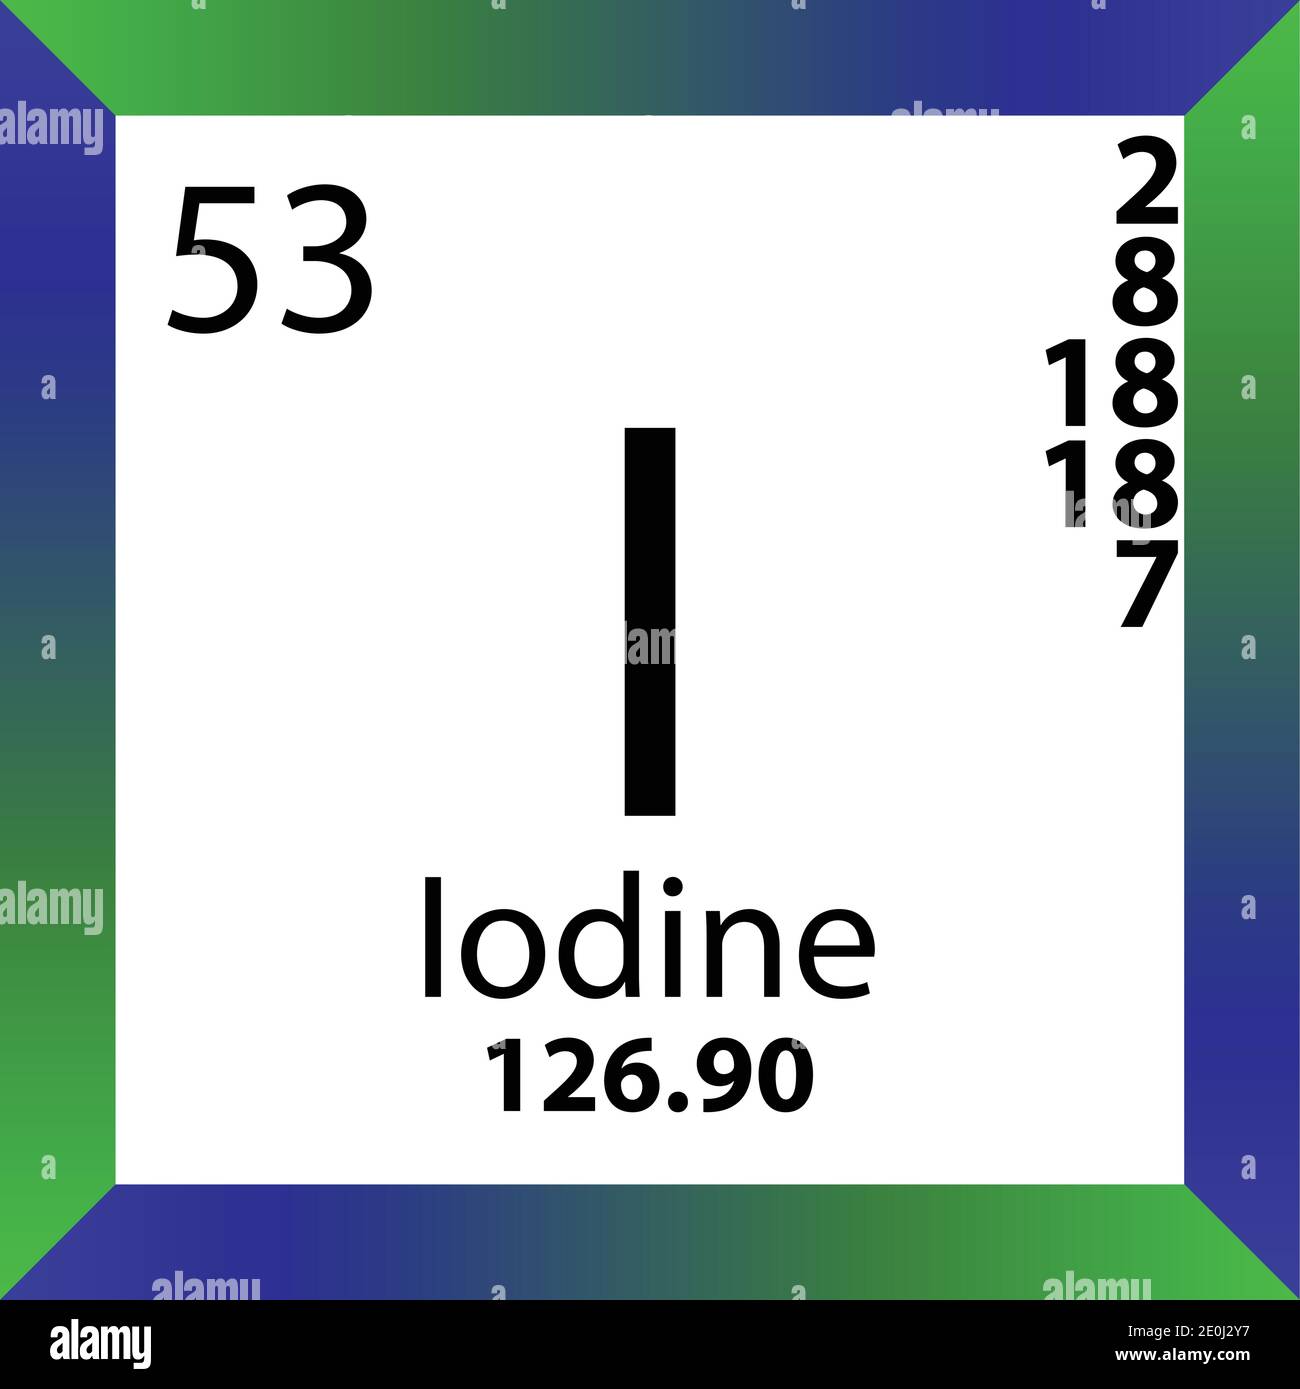 I Iodine Chemical Element Periodic Table. Single vector illustration, colorful Icon with molar mass, electron conf. and atomic number. Stock Vector